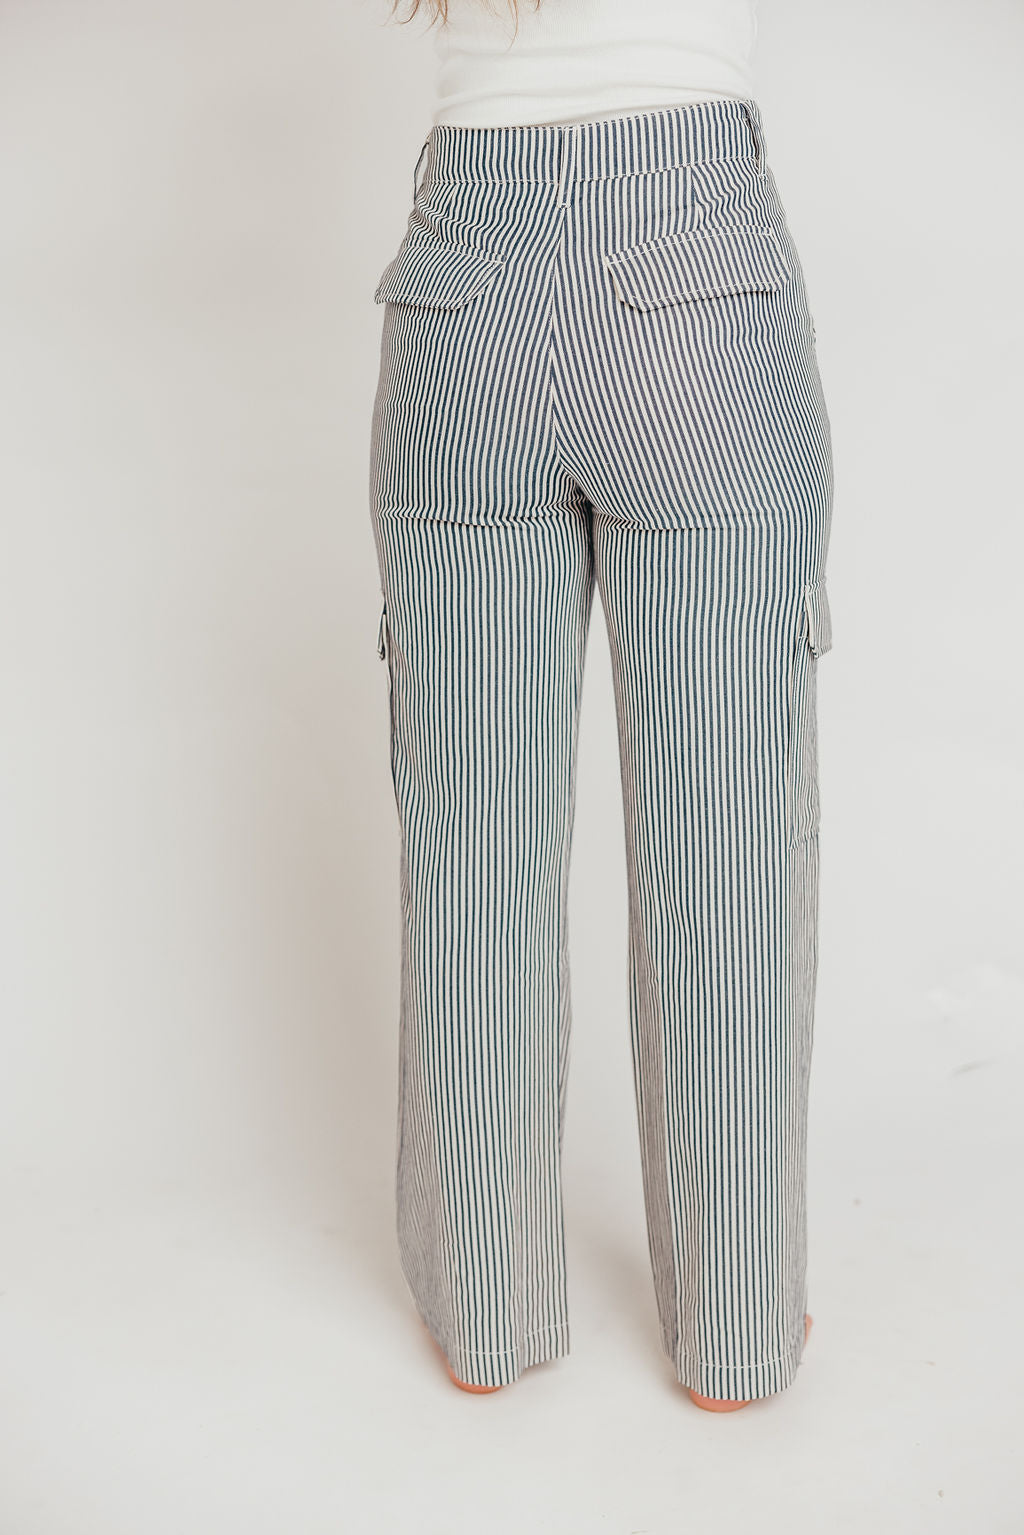 Vincent 100% Cotton Cargo Pant in Navy Stripe